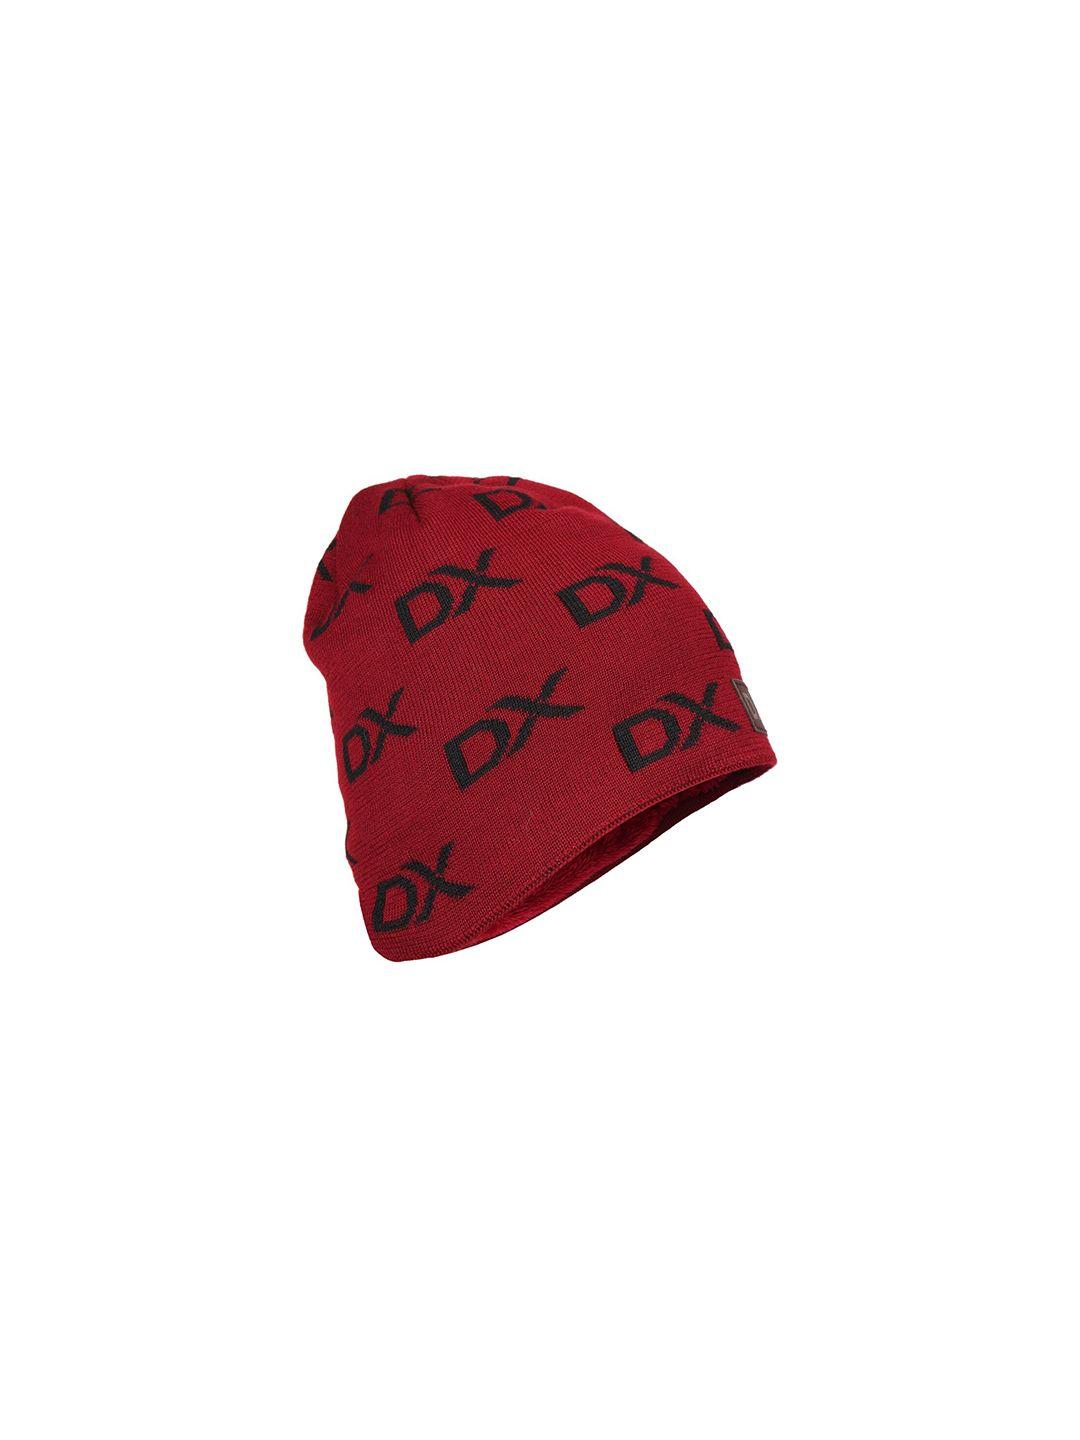 isweven unisex red & black inside fur thick beanie